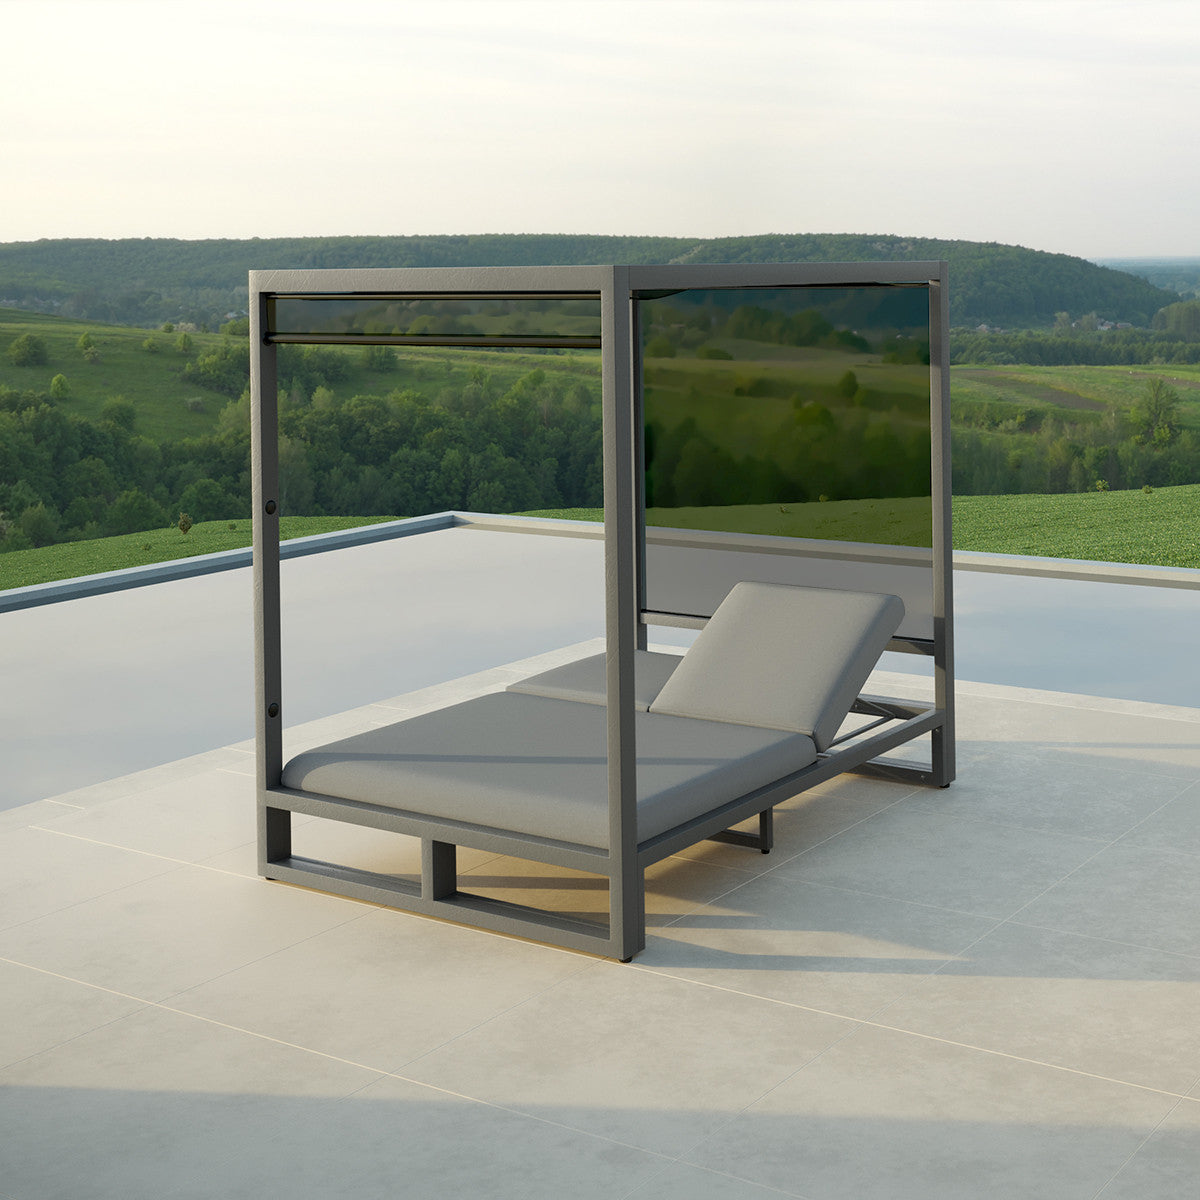 Allure Cabana Outdoor Fabric Daybed